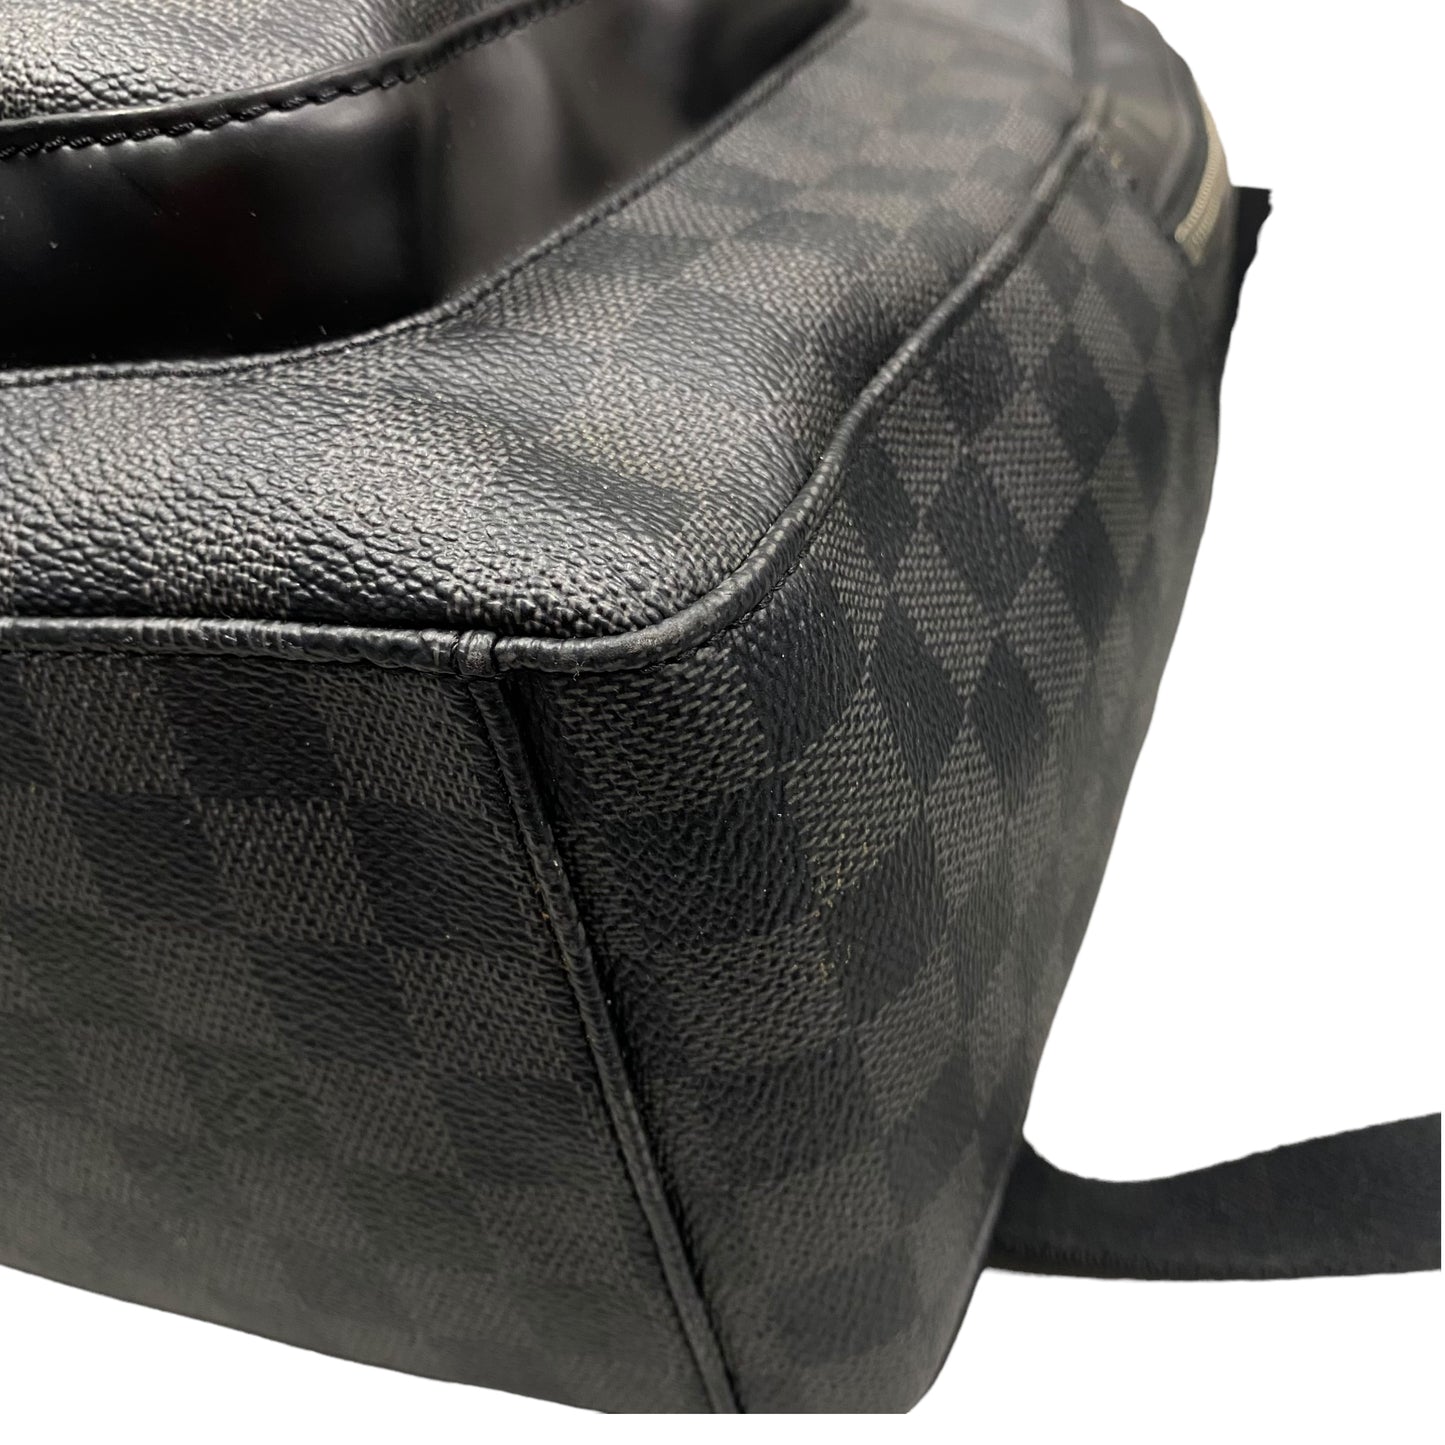 Backpack Luxury Designer By Louis Vuitton  Size: Large